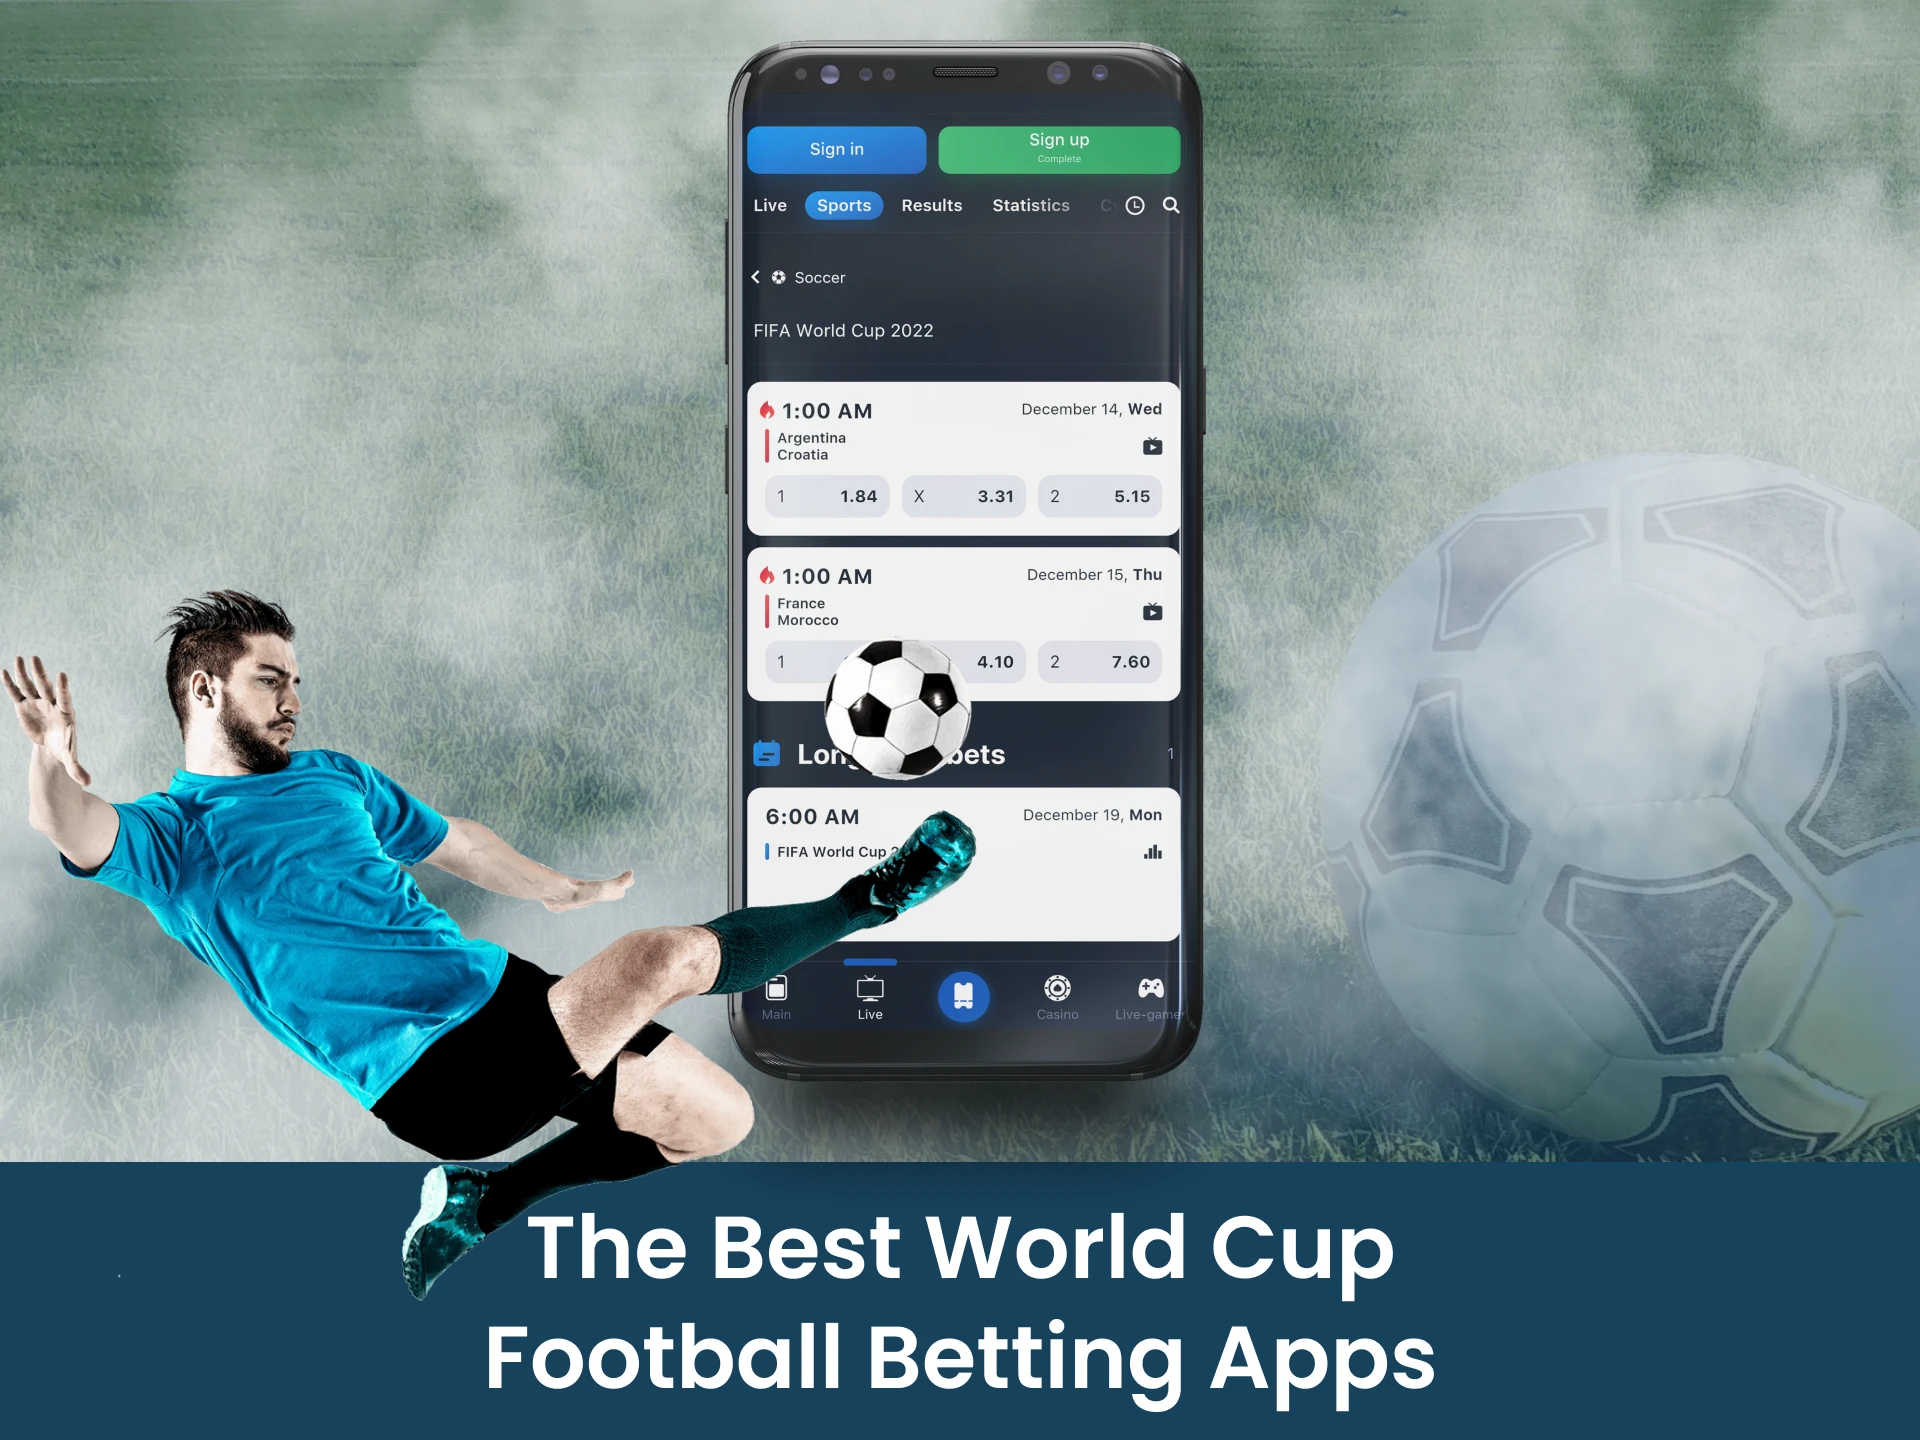 Pick one of these apps for betting on the World Cup matches.